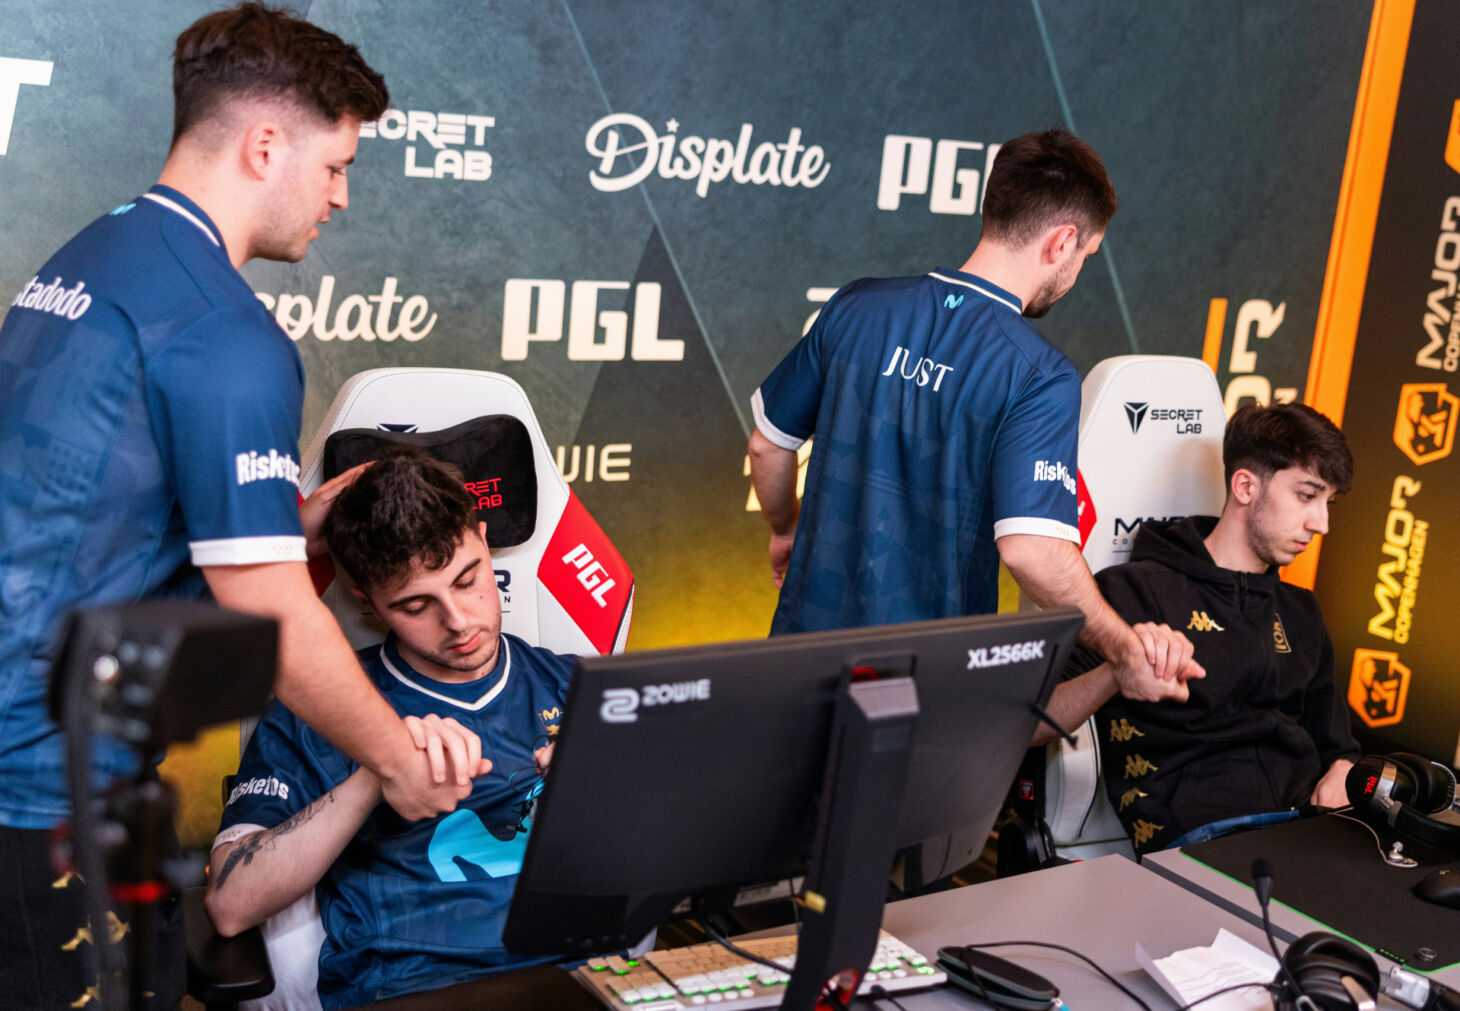 Movistar KOI’s Early Exit: CS2 Major Disappointment